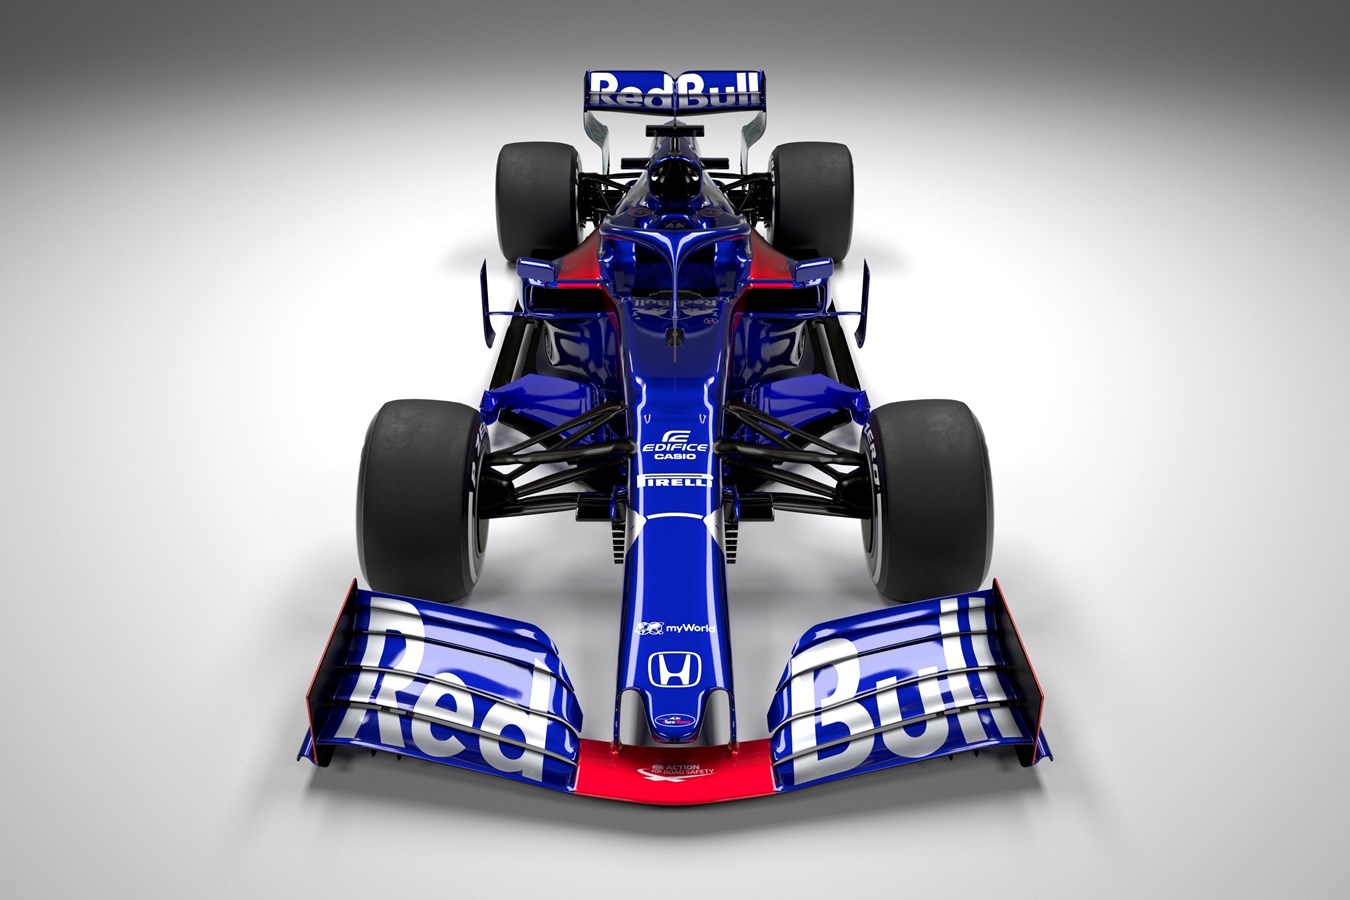 STR14 Launched ahead of 2019 season